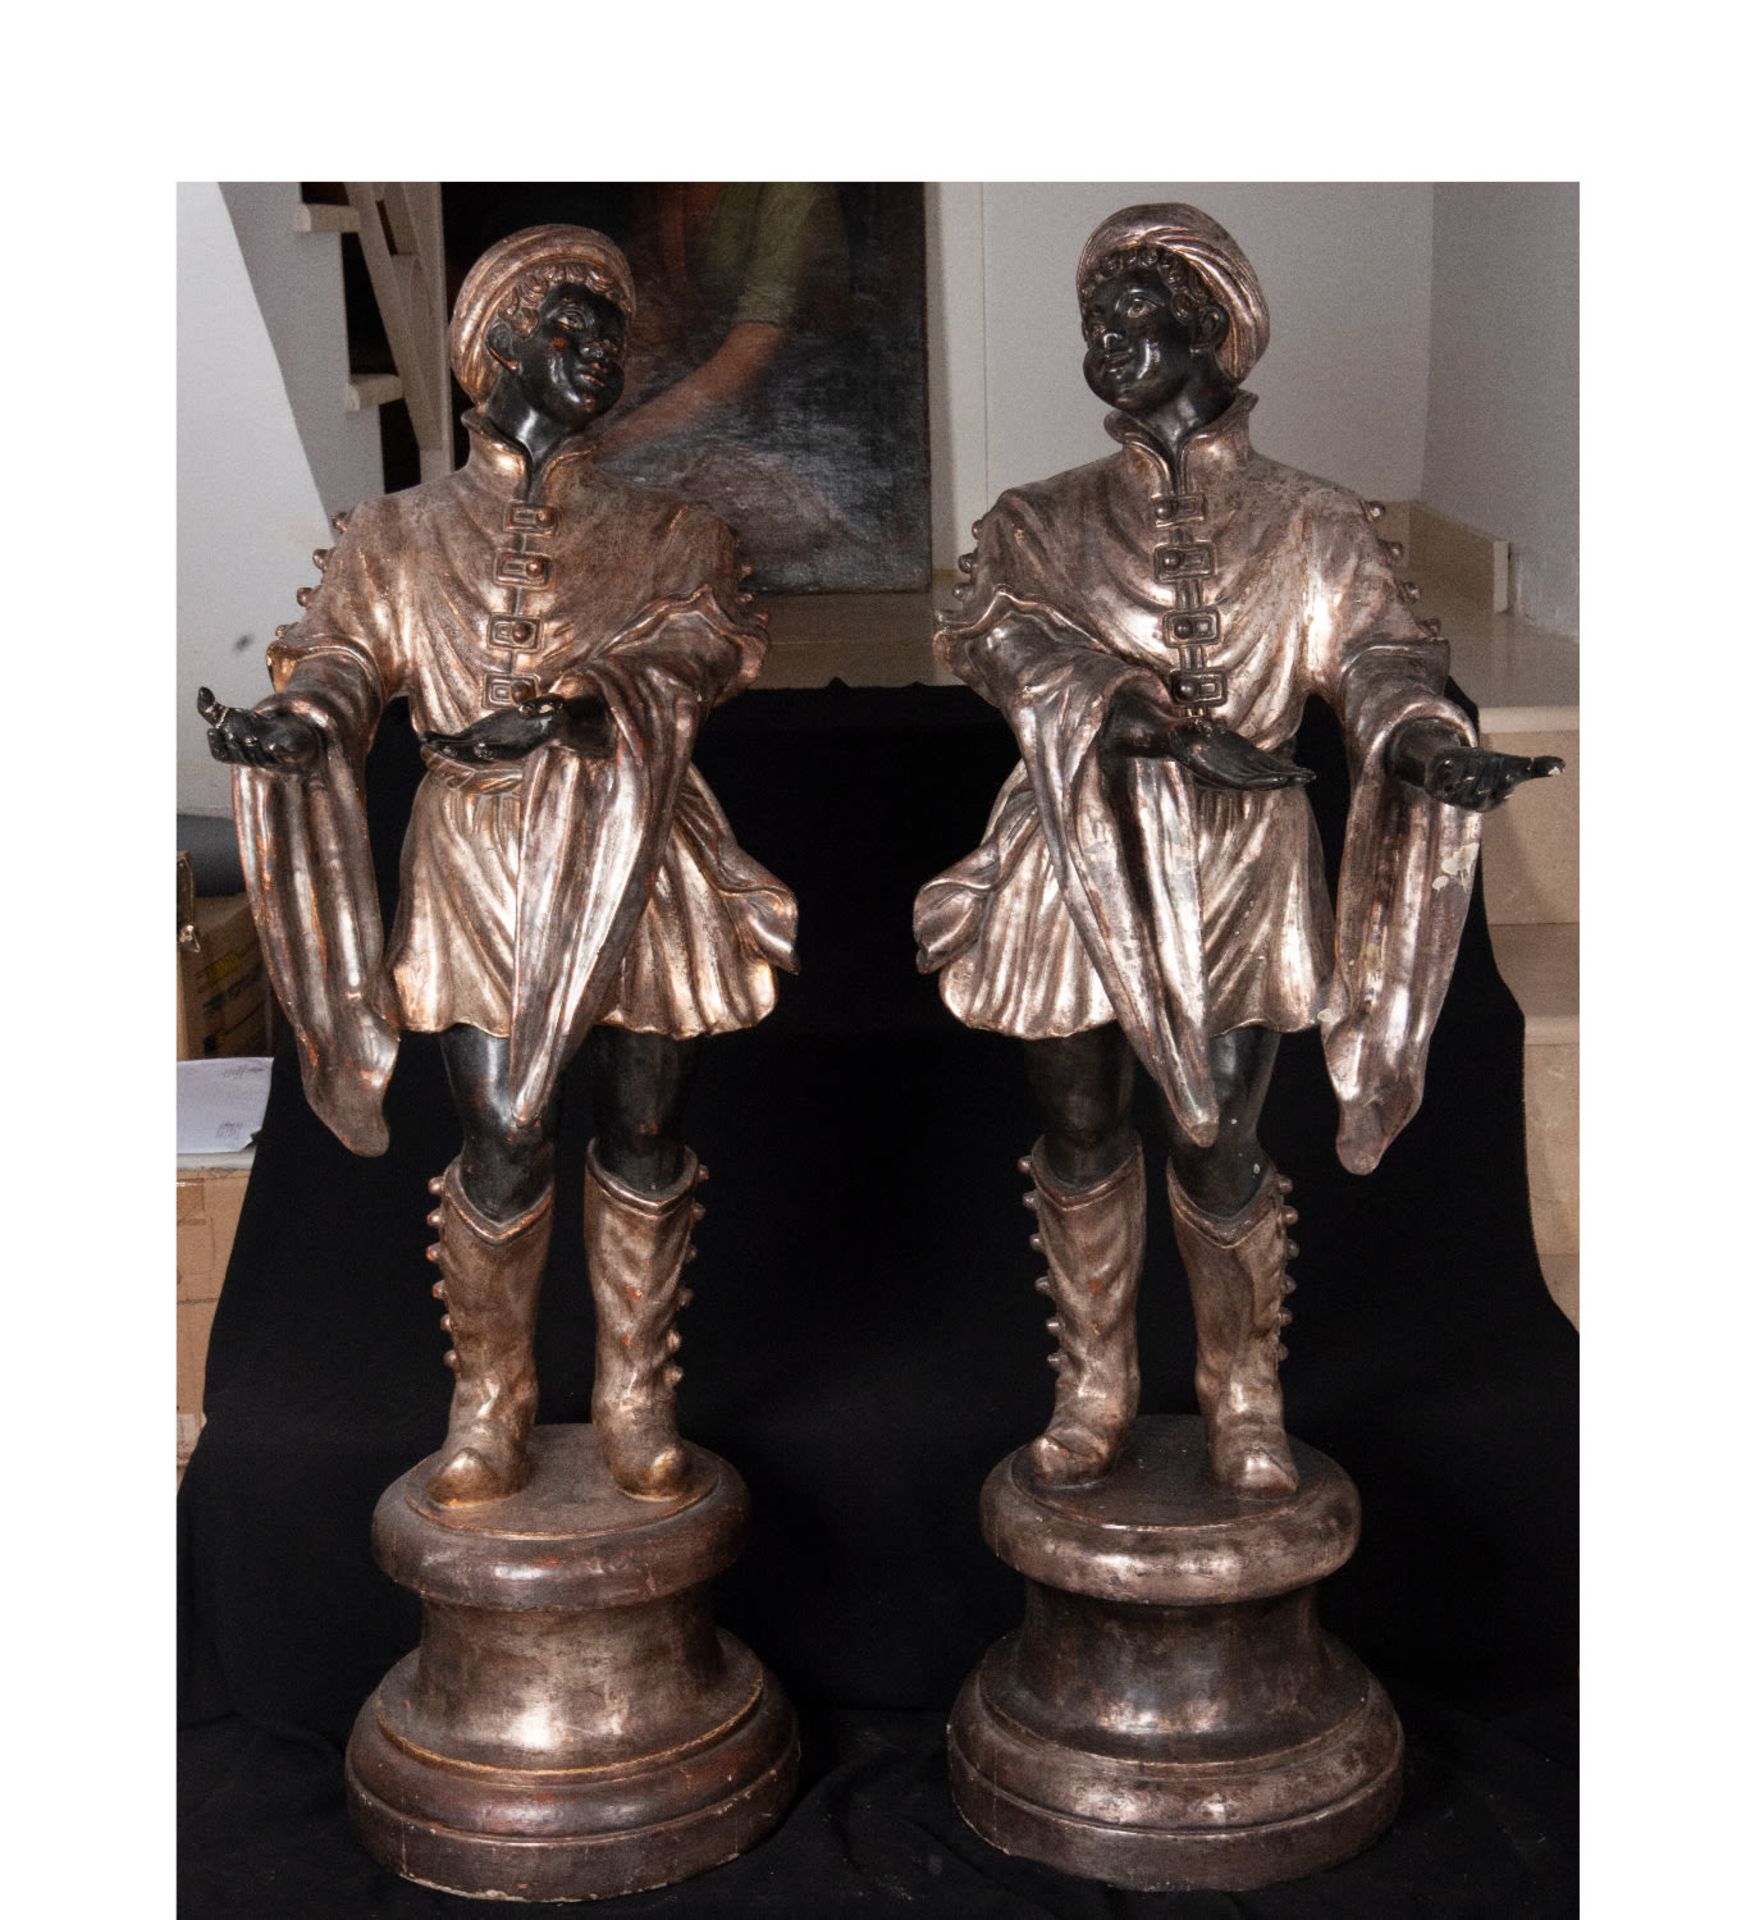 Pair of large and important Venetian "Morettos" from the late 18th century